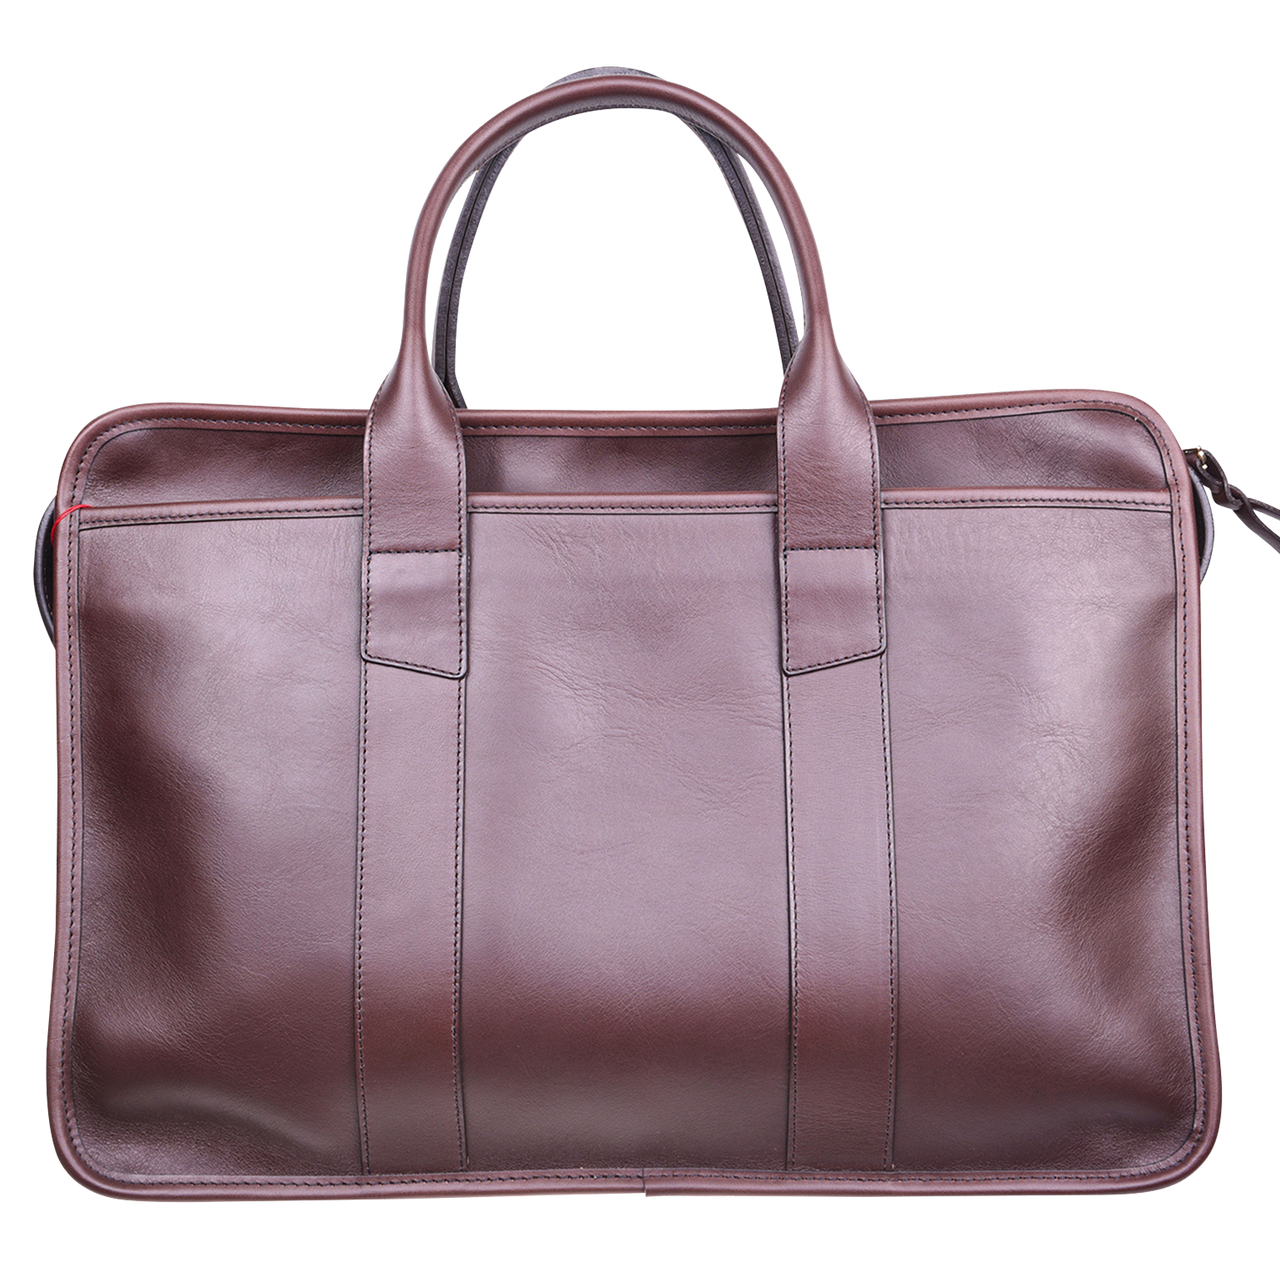 Frank Clegg x WJ & Co. Bound Edge Zip-Top Briefcase in Chocolate Tumbled Leather